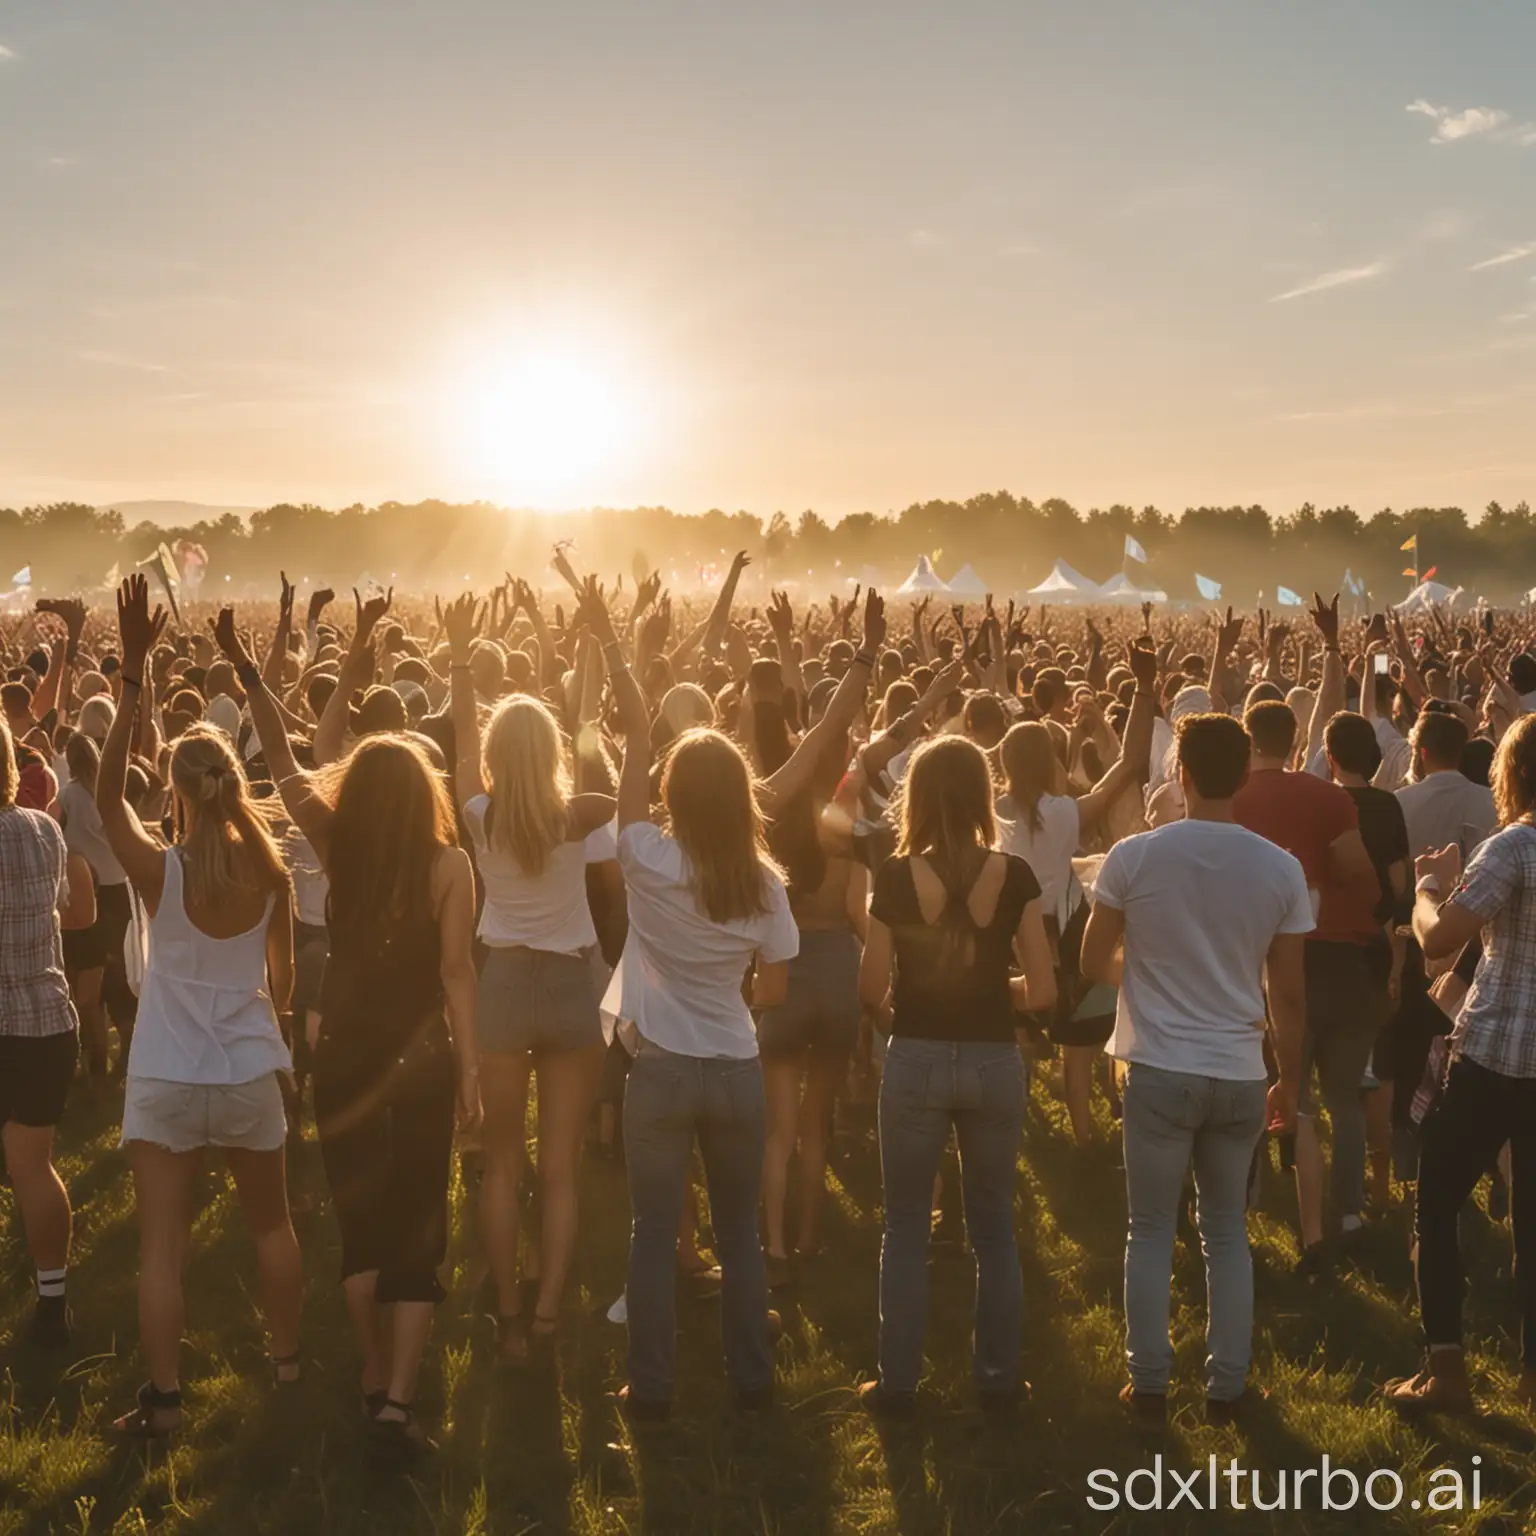 A large crowd gathers in a field, enjoying a music festival. The crowd cheers and dances to the music, and the sun shines brightly.